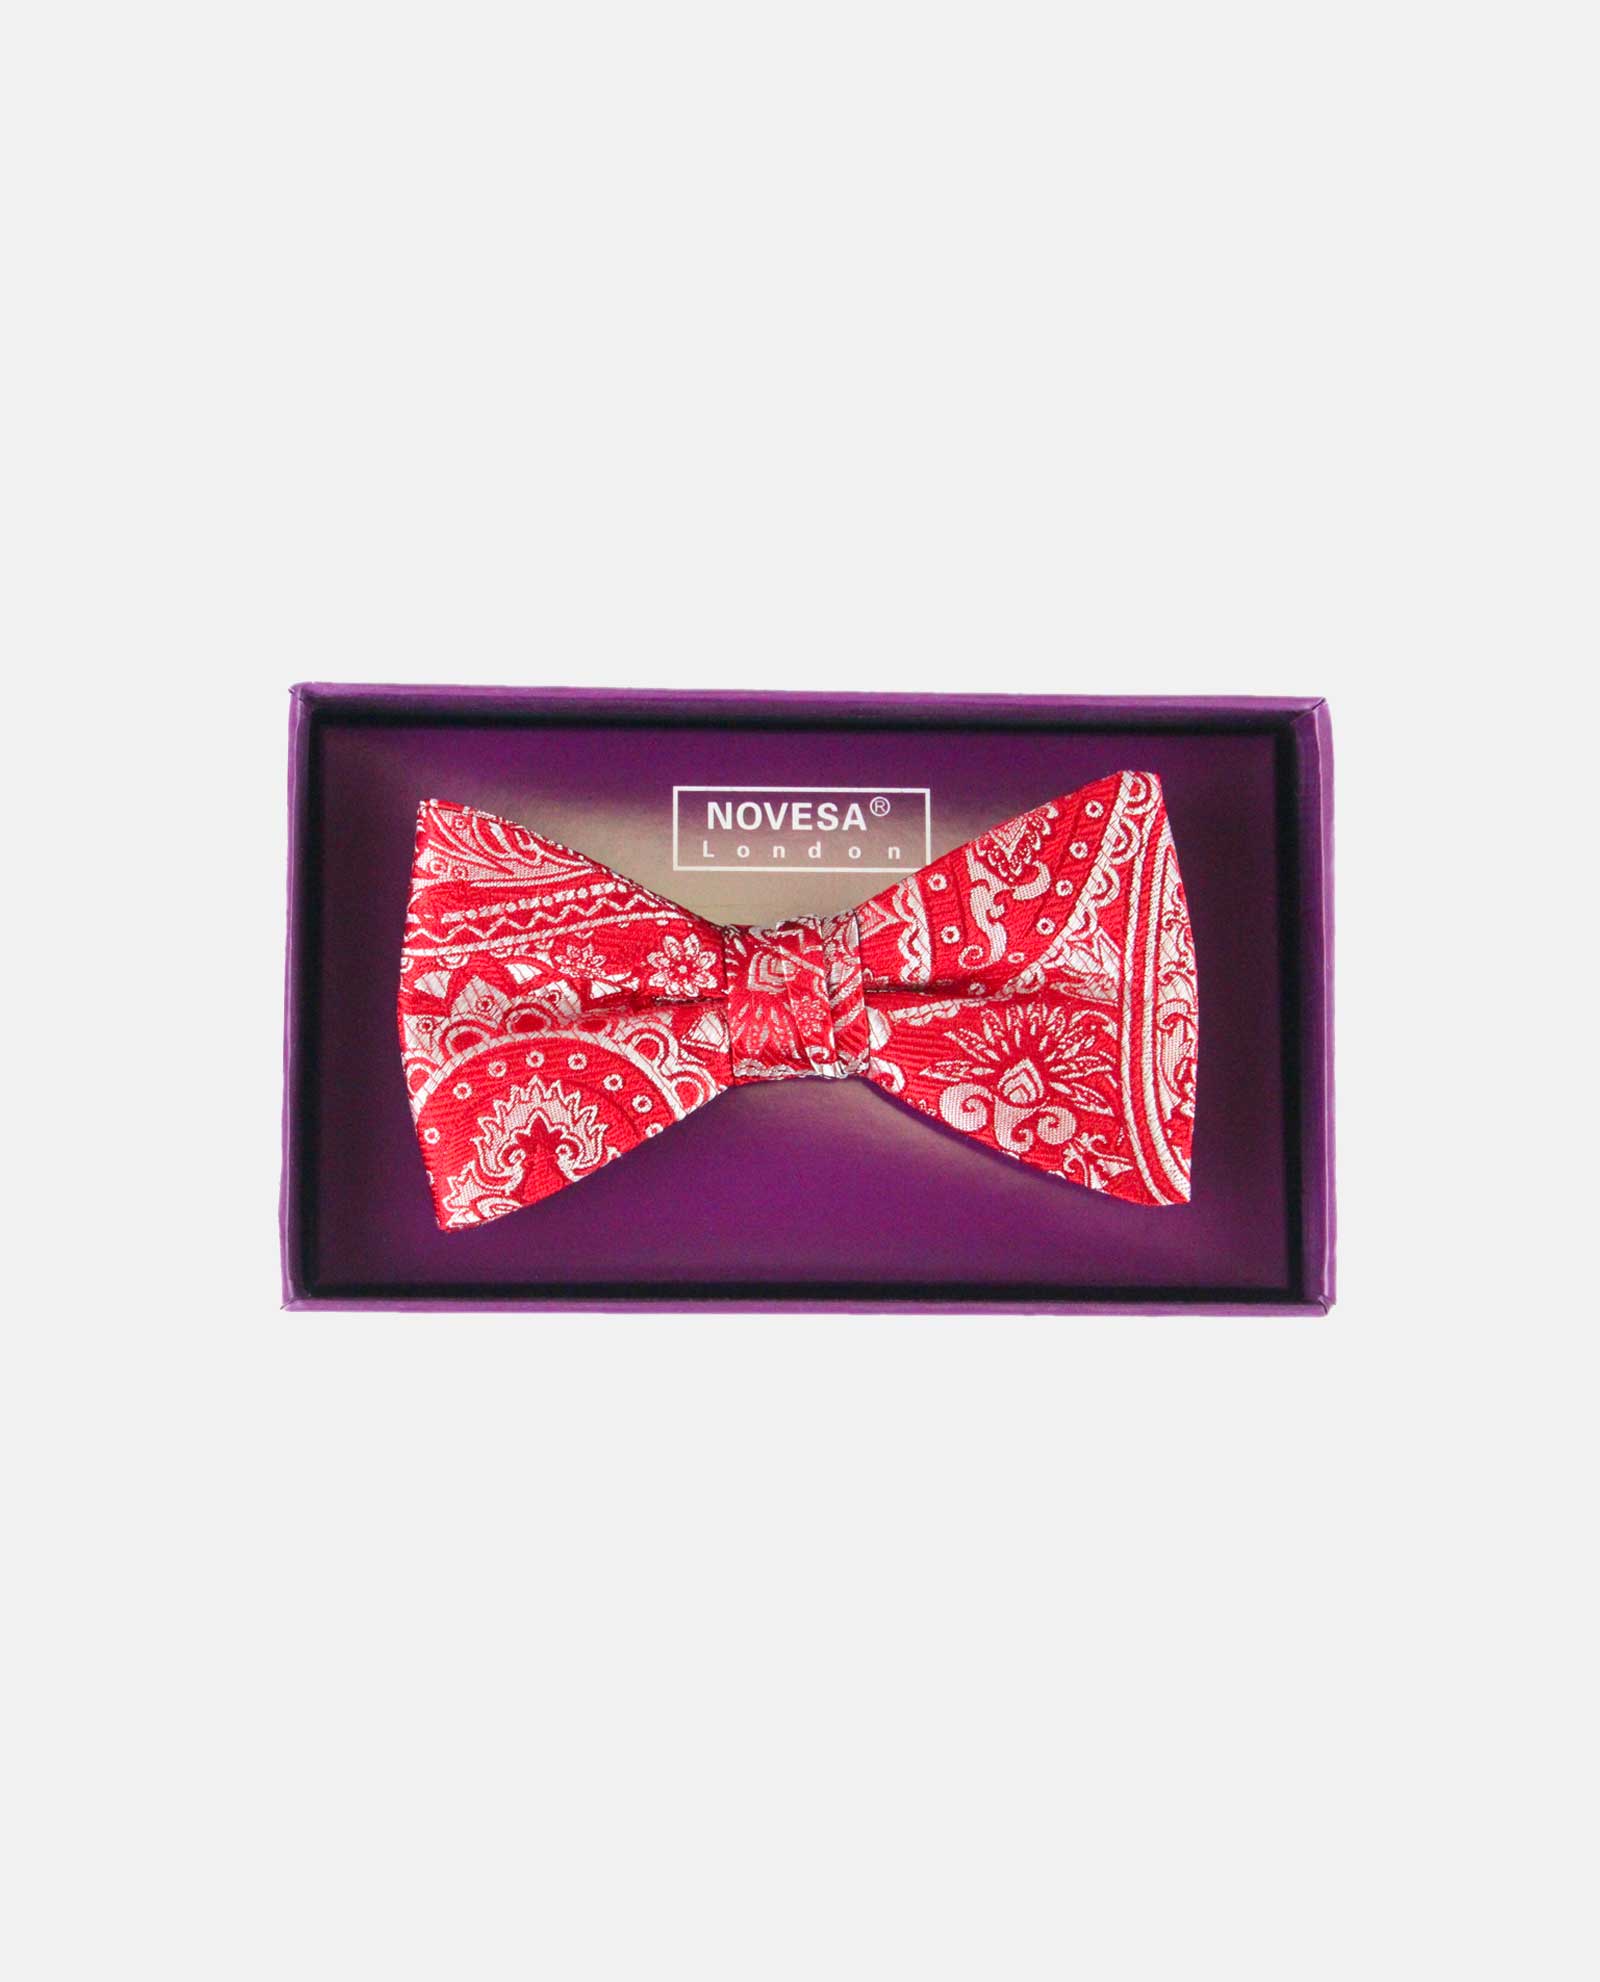 Red with White Paisley Bow Tie